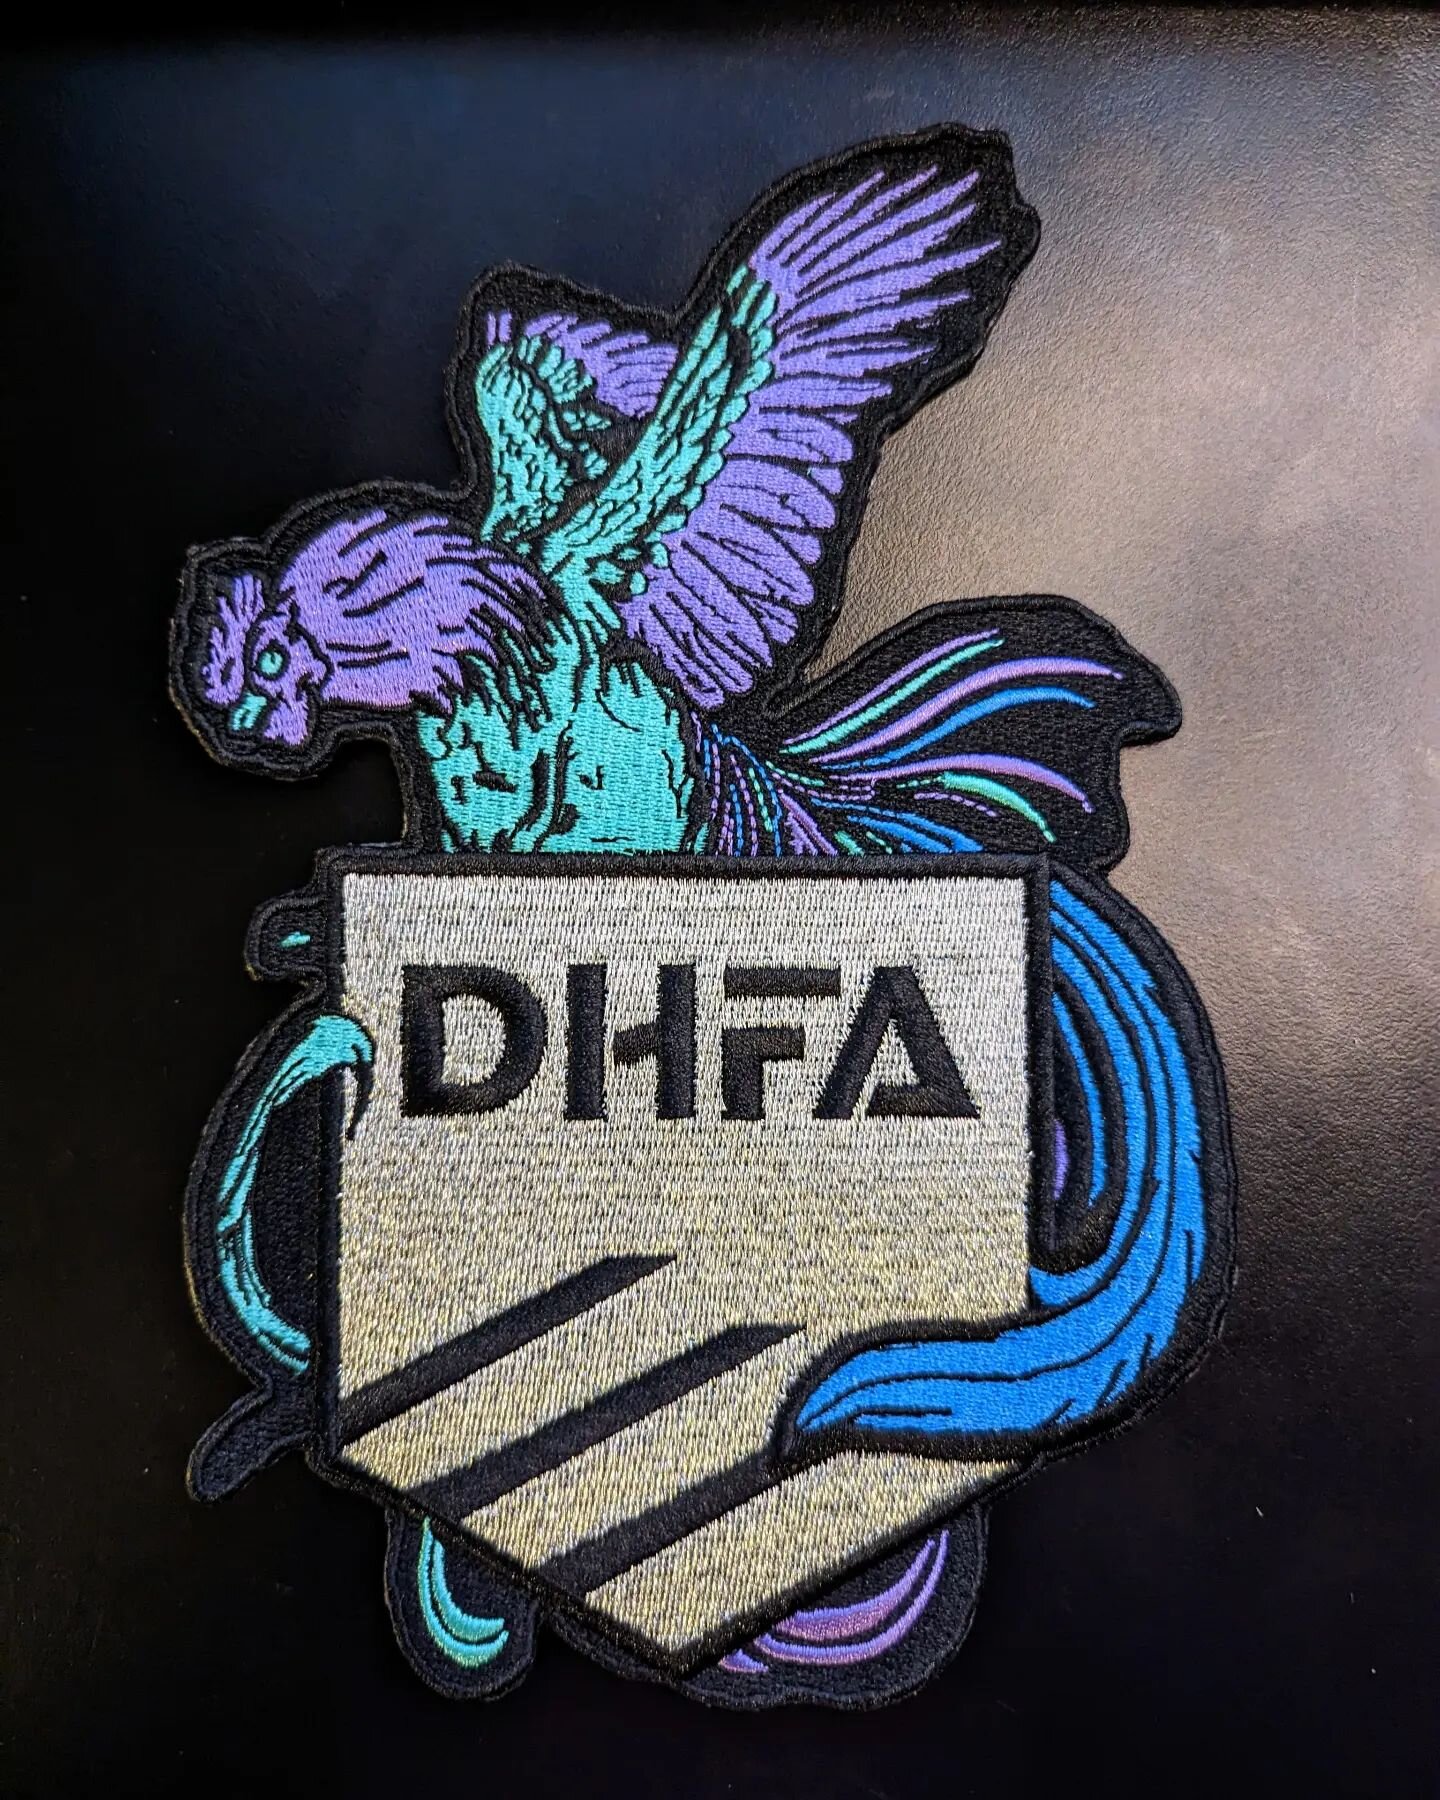 Yes, we now have a techno-chicken as our mascot and these patches are sick AF.